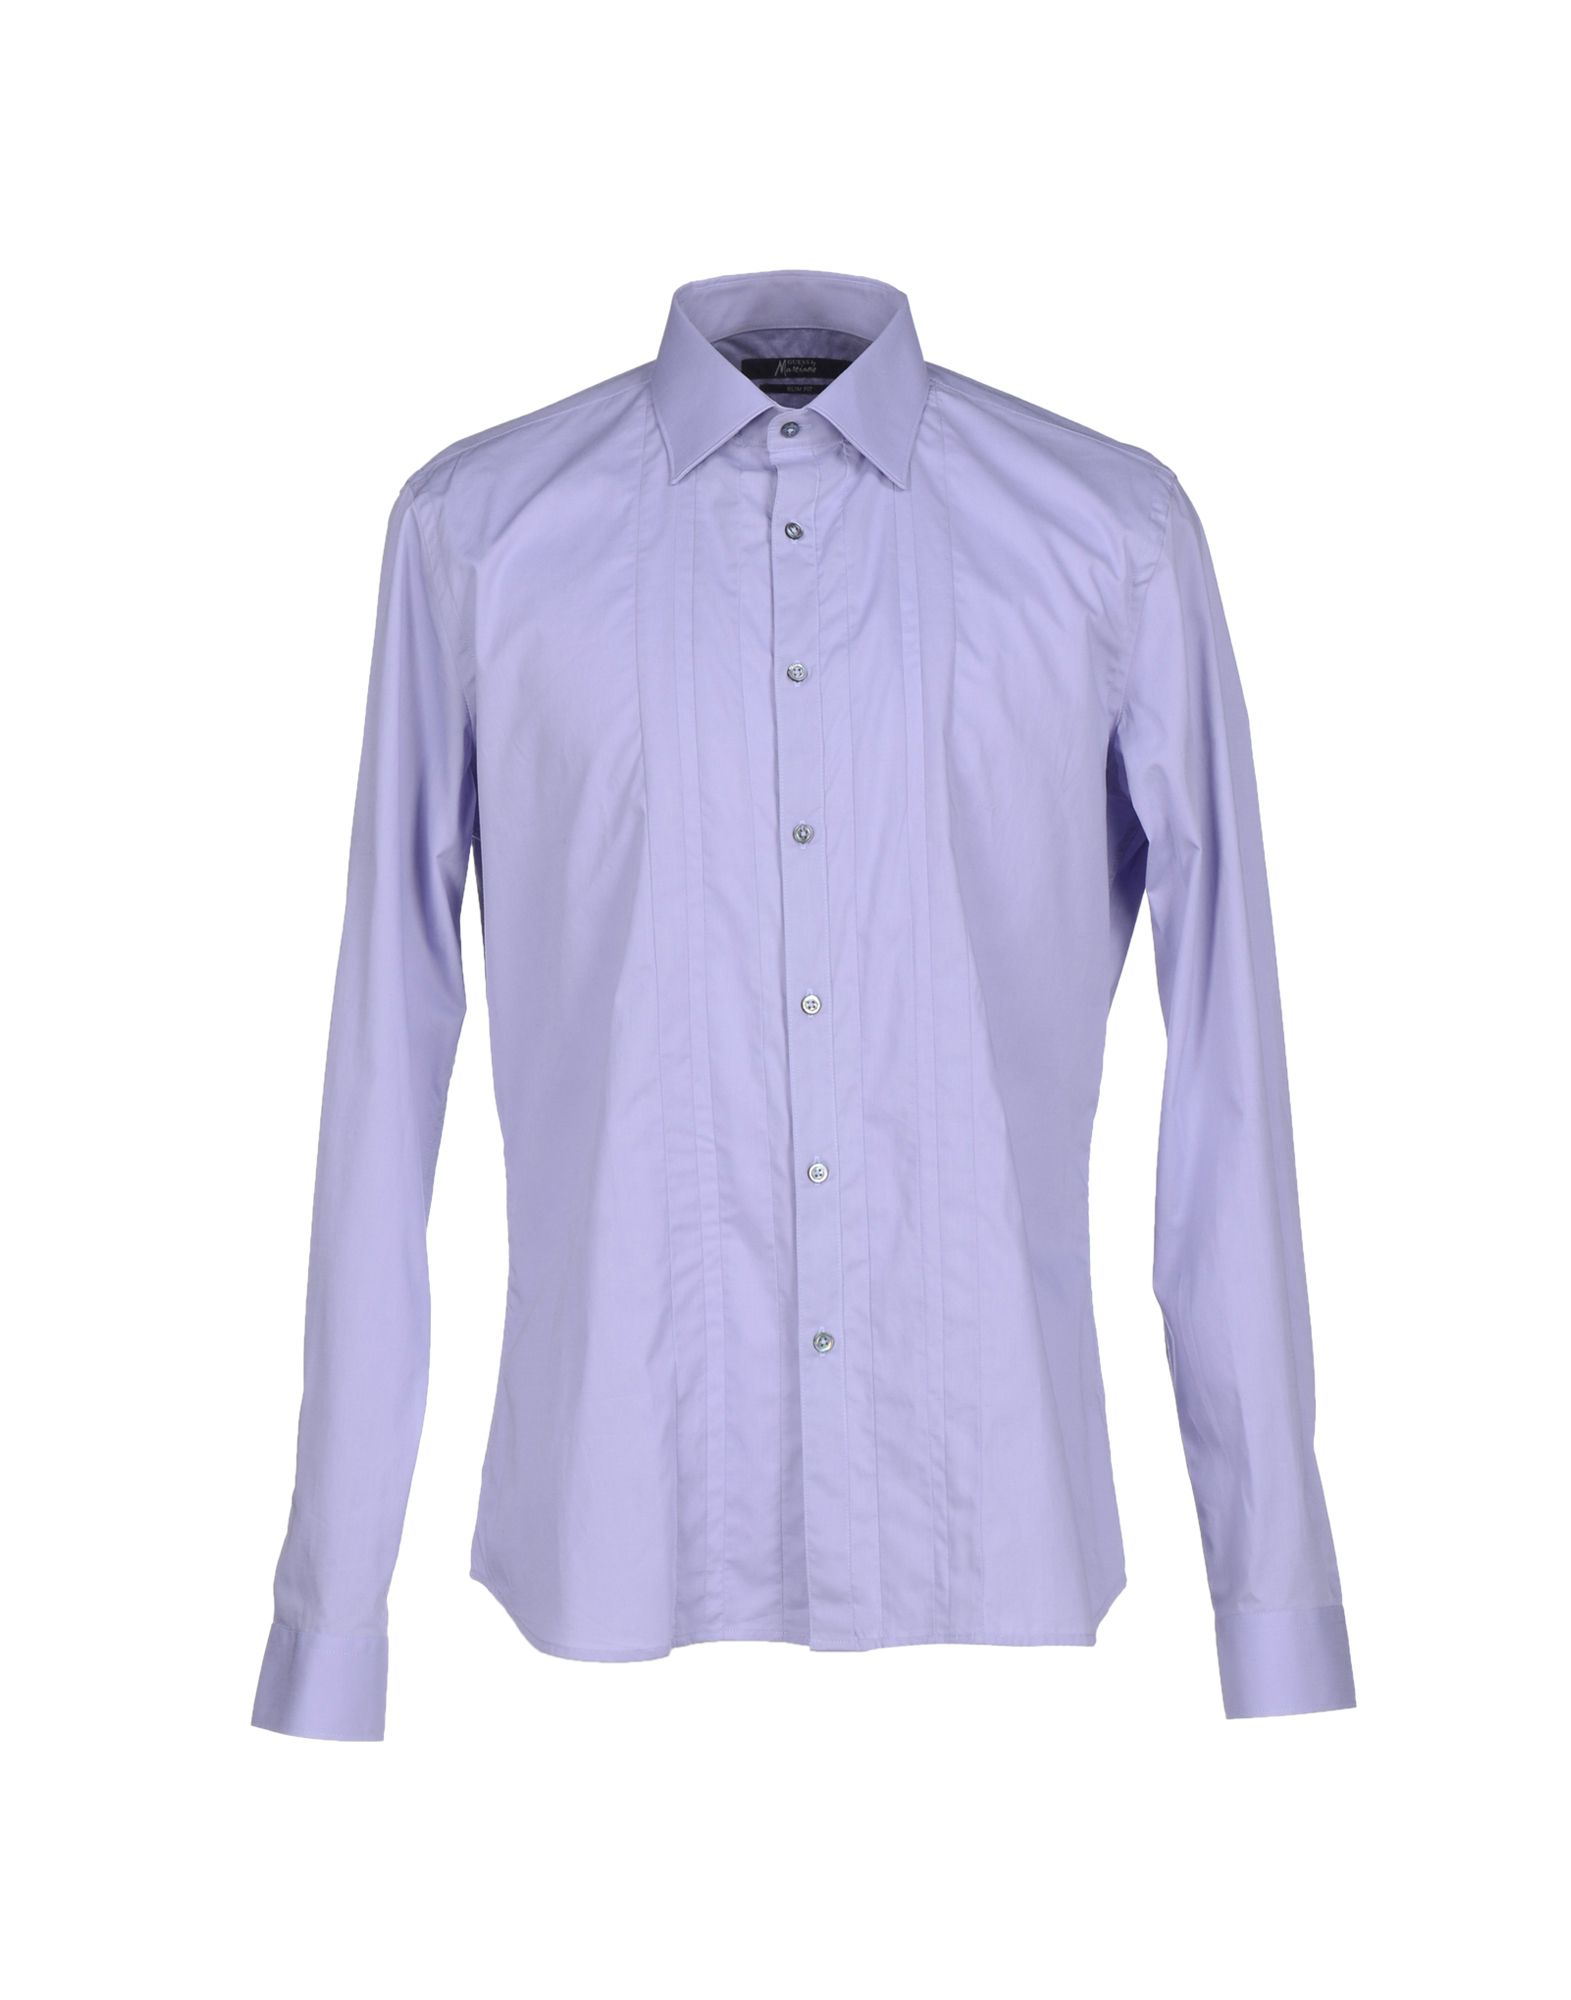 Guess Shirt in Purple for Men (Lilac) | Lyst